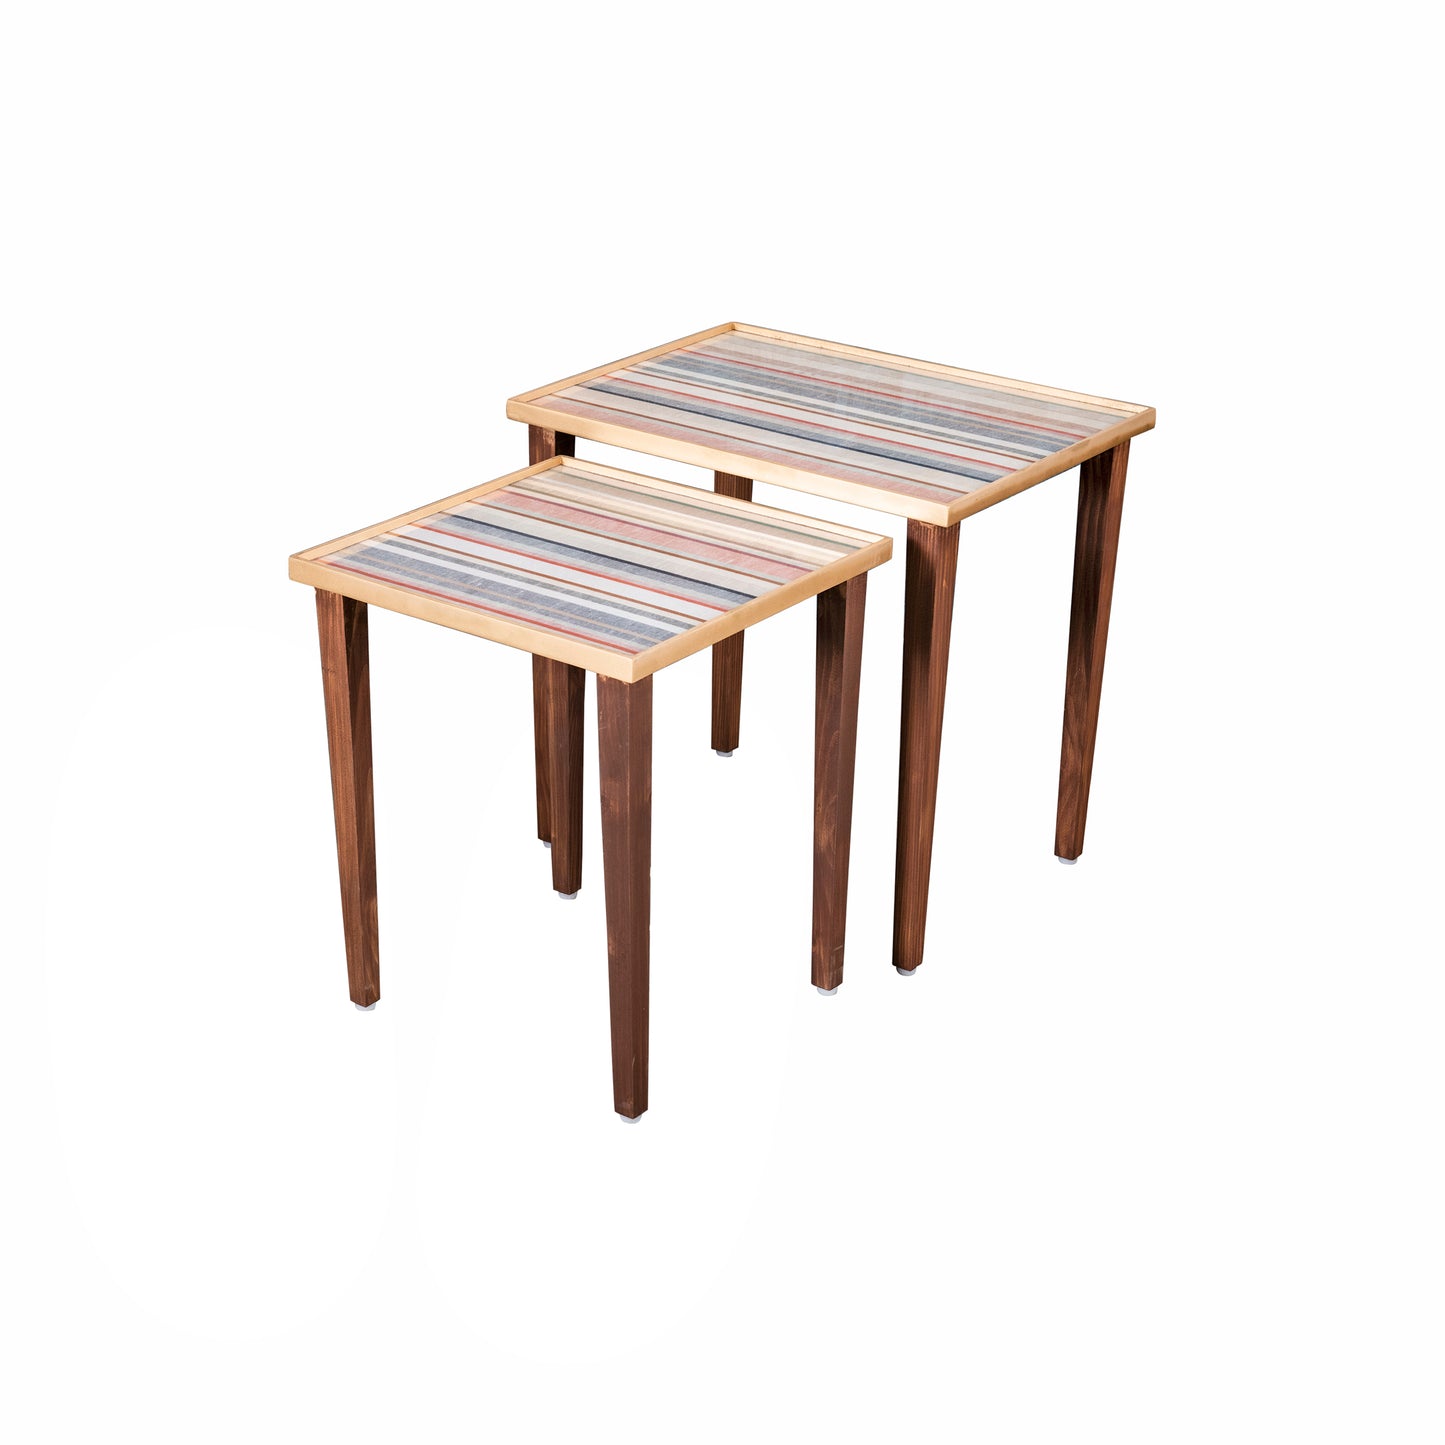 A Tiny Mistake Linen Lines Wooden Rectangle Nesting Tables (Set of 2), Living Room Decor